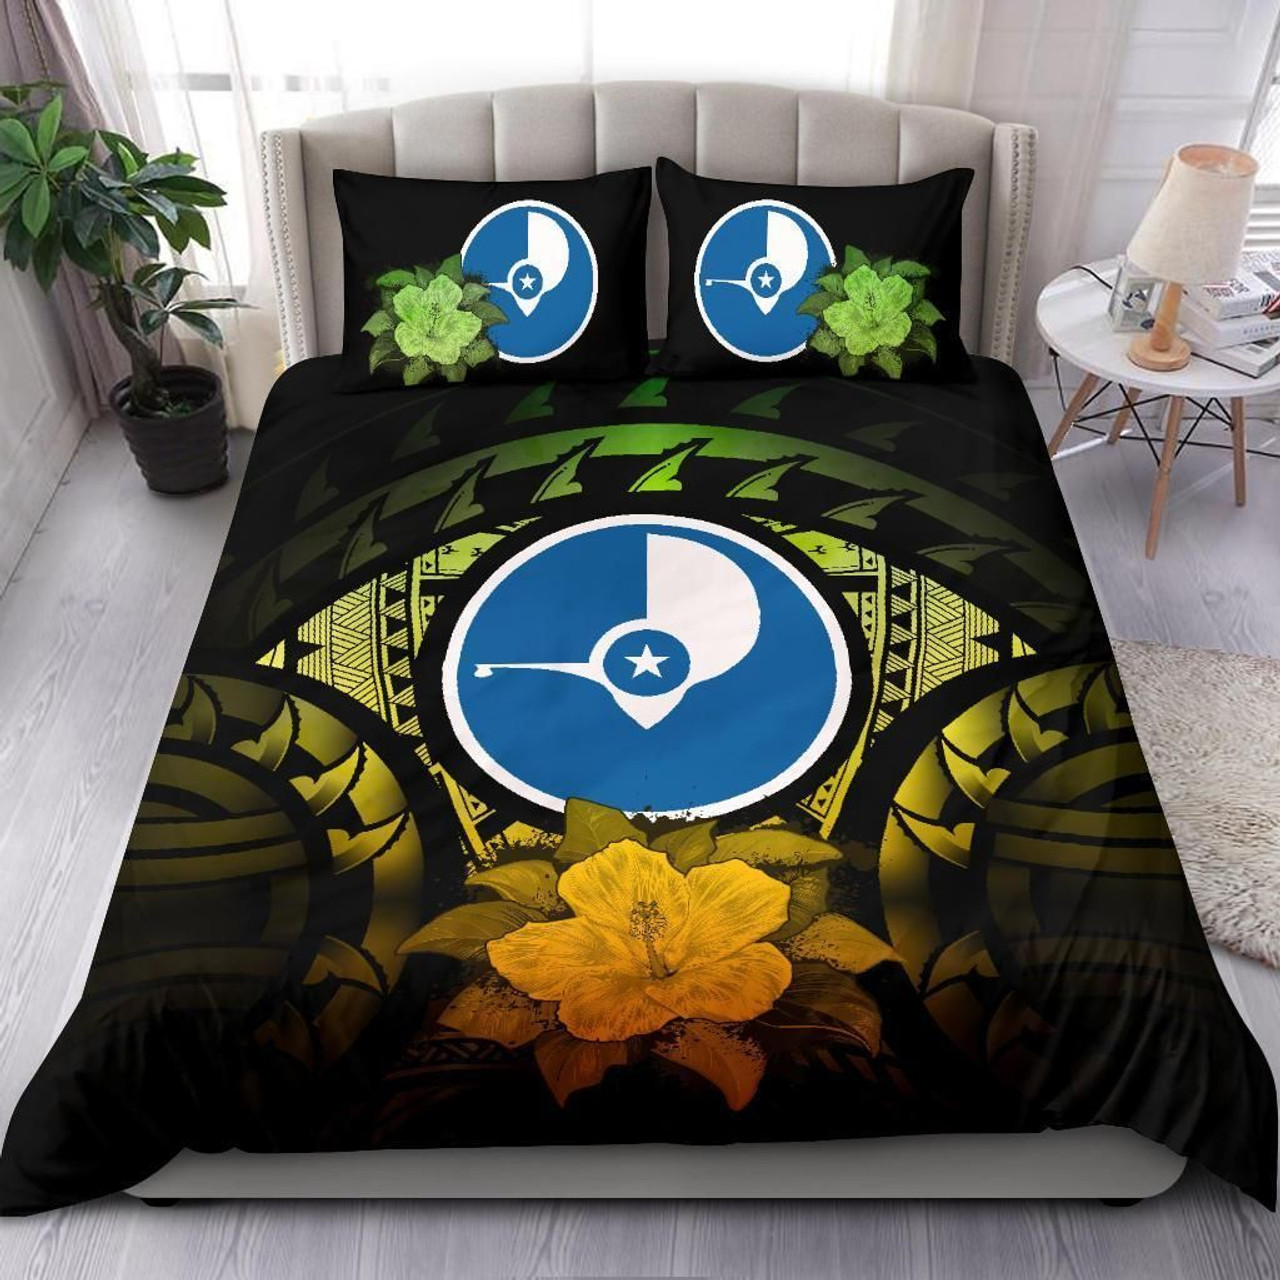 Polynesian Bedding Set - Federated States Of Micronesia Duvet Cover Set Tropical Flowers 5